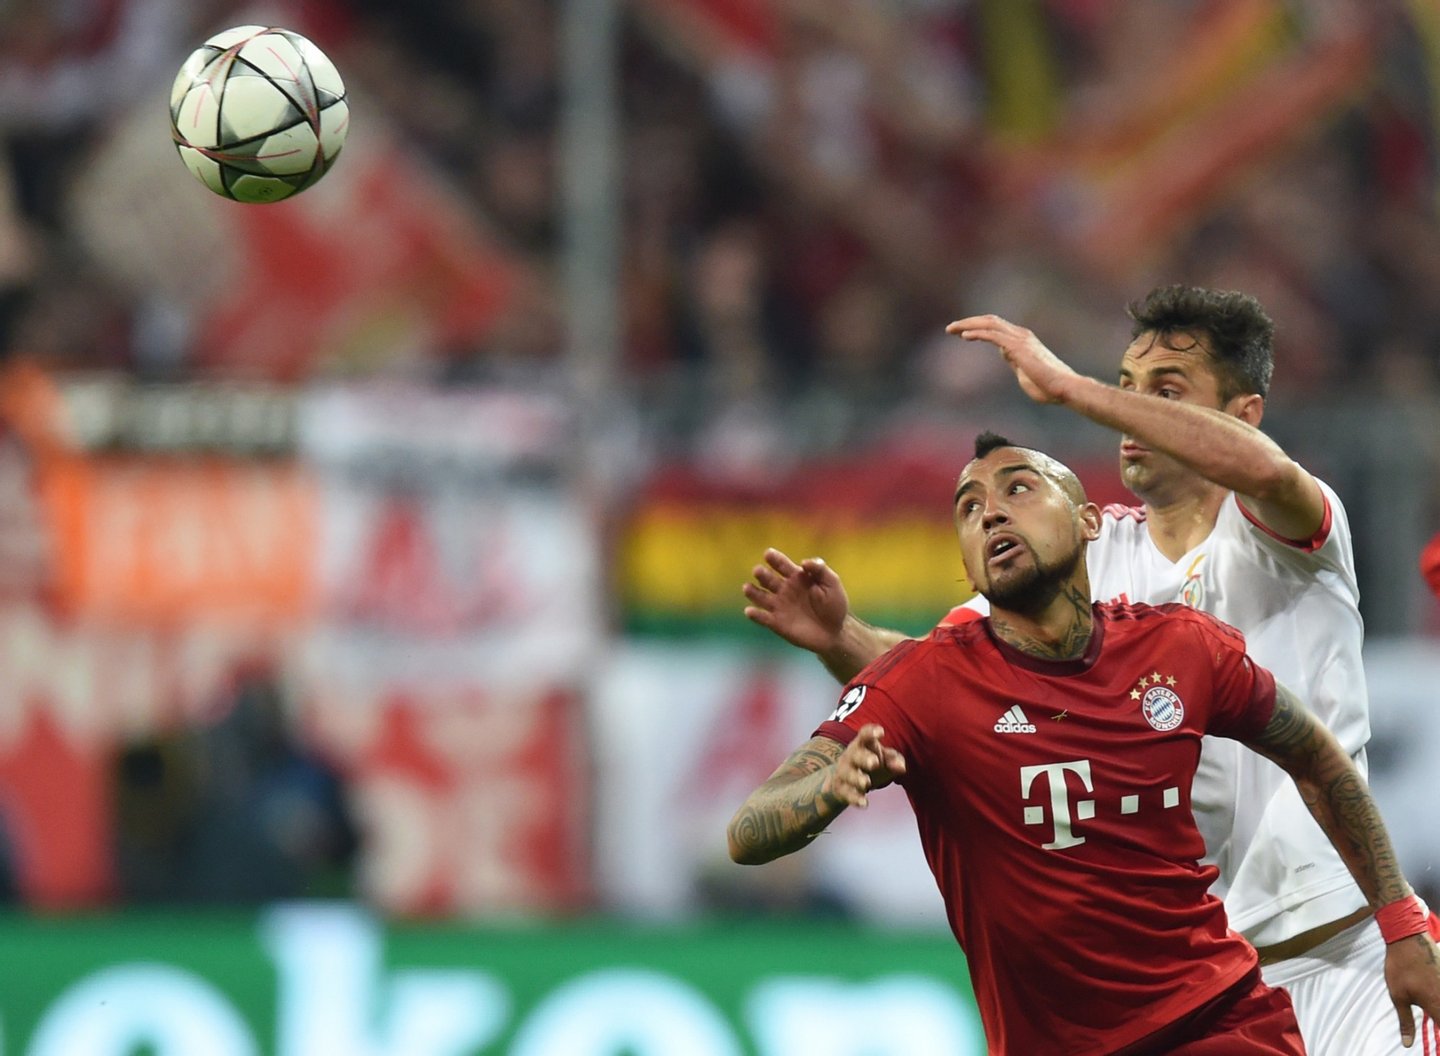 Bayern Munich's Chilean midfielder Arturo Vidal (R) and Benfica's Brazilian forward Jonas vie for the ball during the Champions League quarter-final, first-leg football match between Bayern Munich and Benfica Lisbon in Munich, southern Germany, on April 5, 2016. / AFP / CHRISTOF STACHE (Photo credit should read CHRISTOF STACHE/AFP/Getty Images)